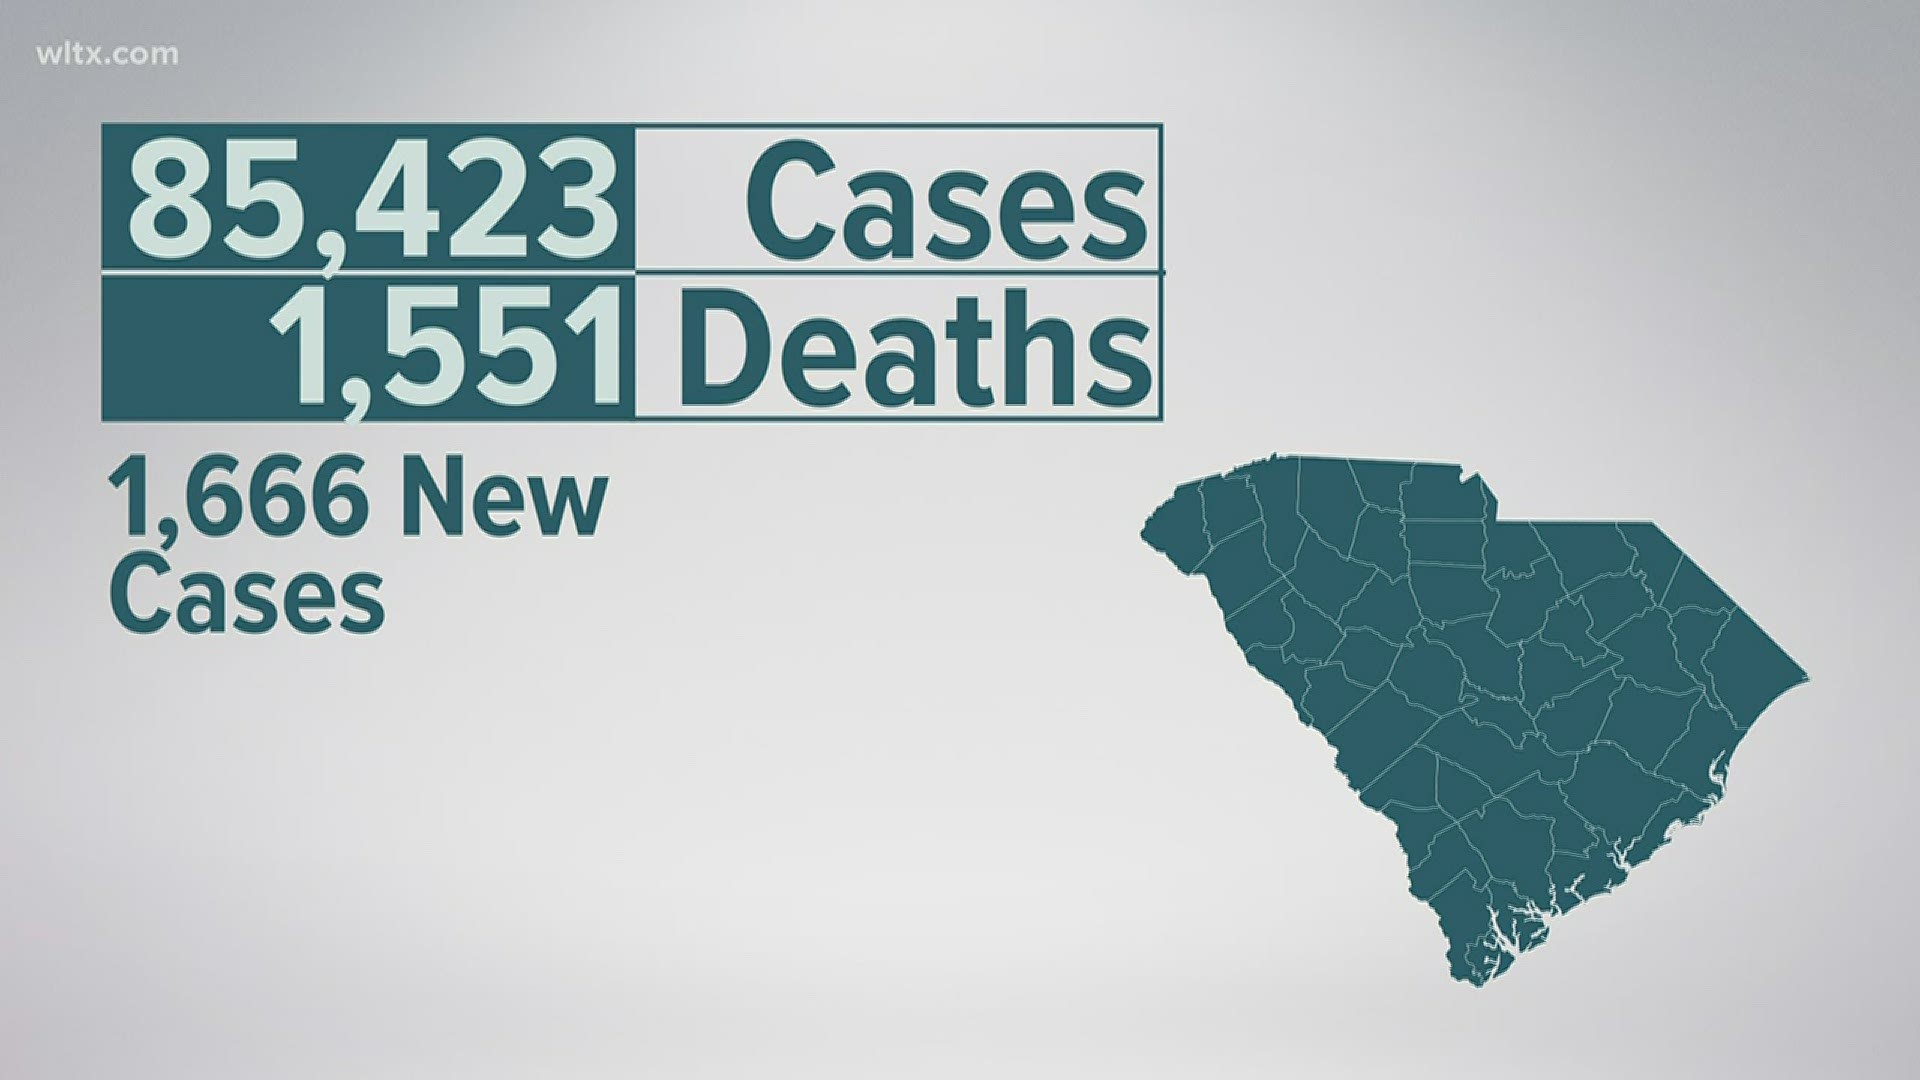 This brings the total number of confirmed cases to 85,423 probable cases to 423, confirmed deaths to 1,551, and 64 probable deaths